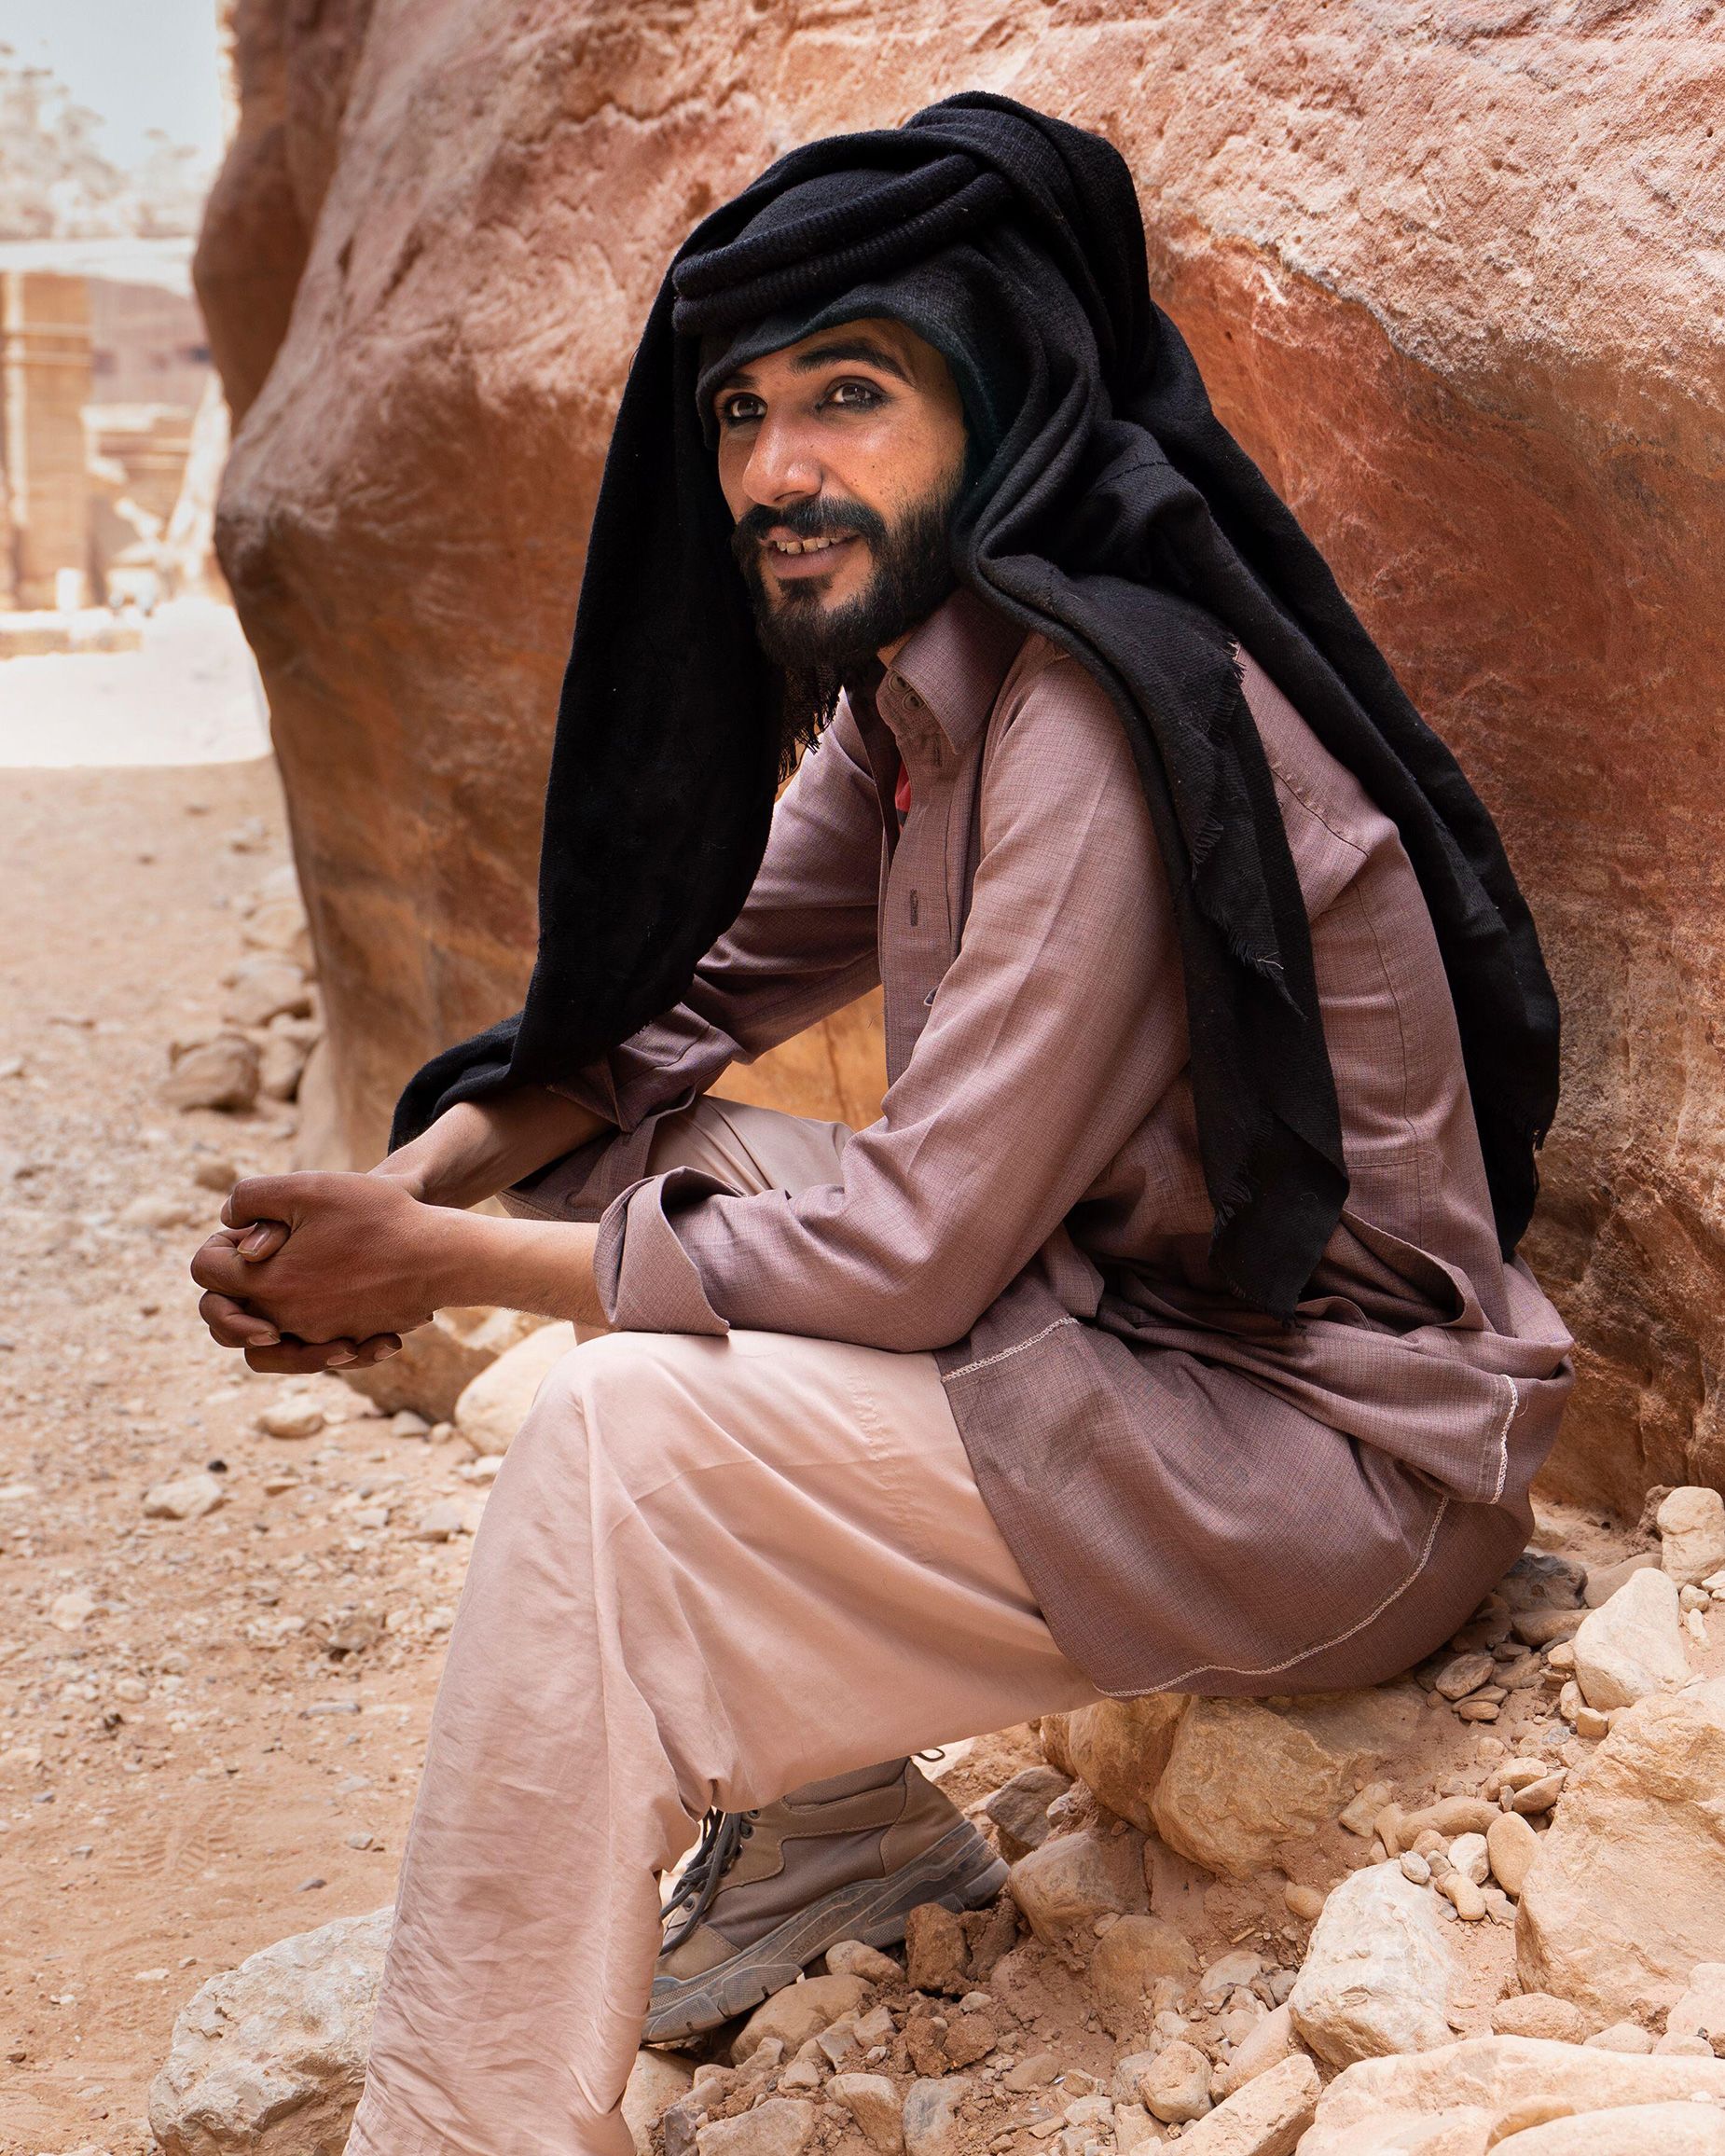 A Bedouin man wearing traditional kohl, photographed in the ancient Jordanian city of Petra.